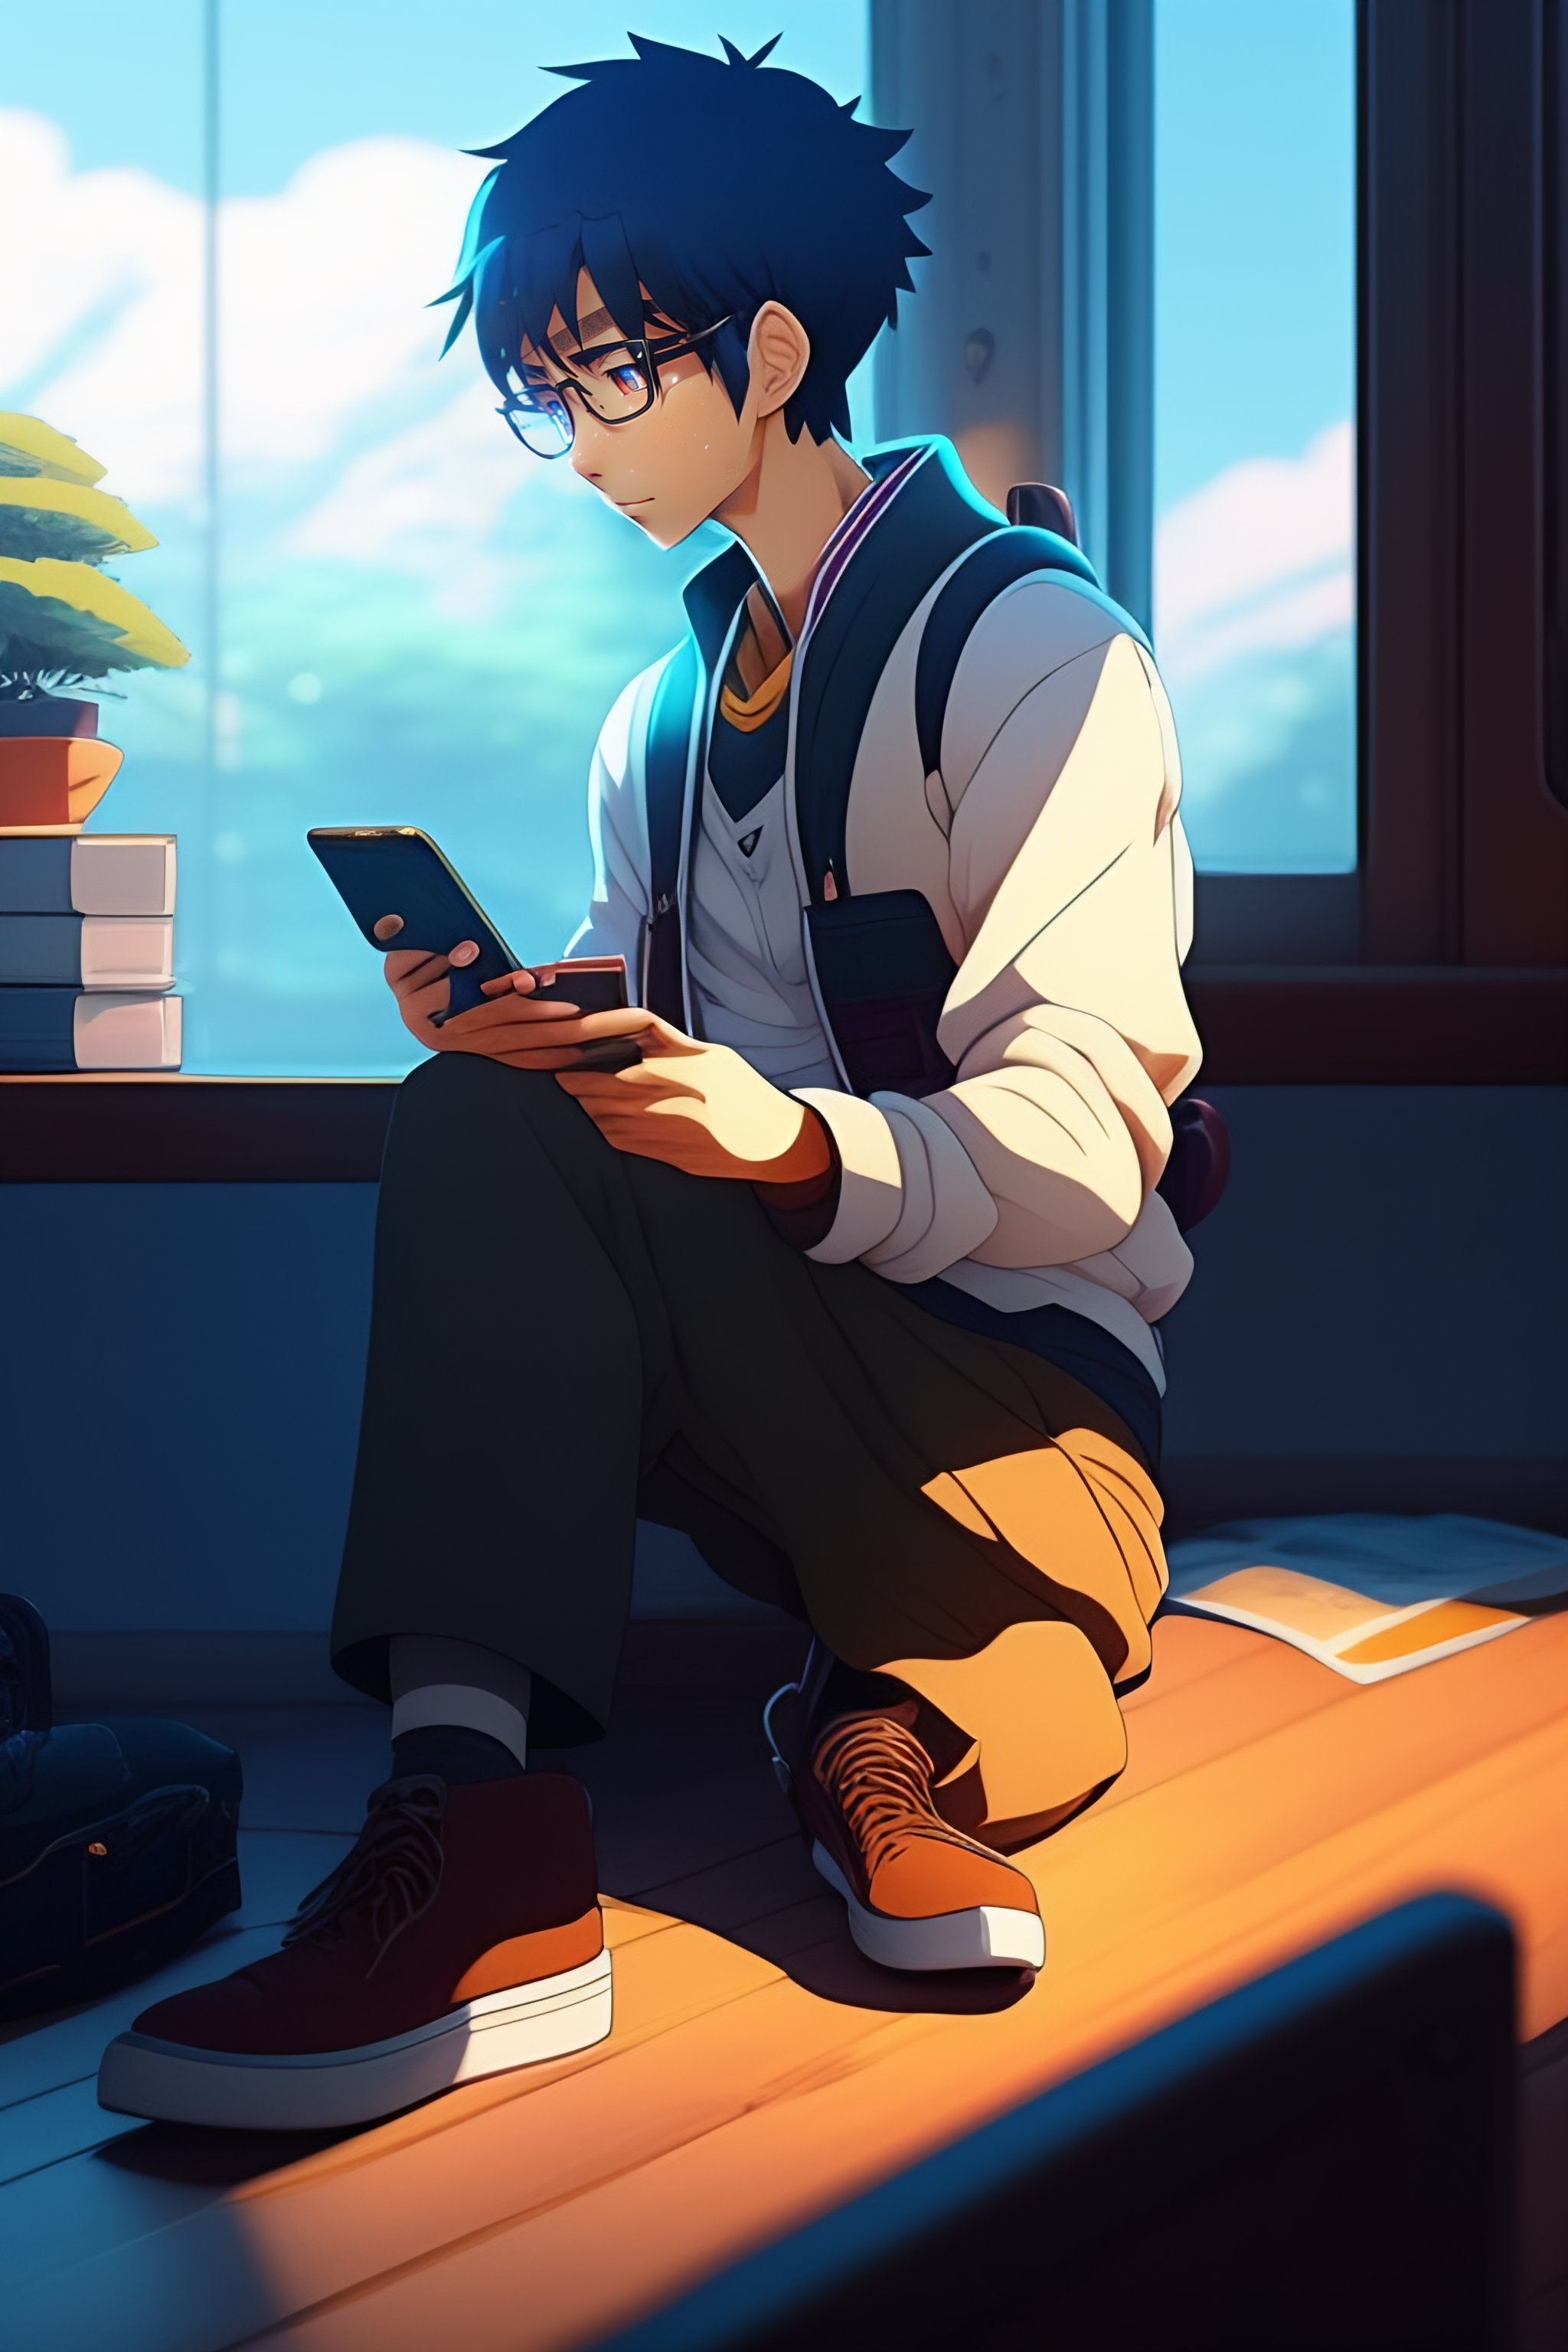 Lexica - A nerdy anime boy is using the phone scrolling in instagram in a  room full of gadgets, by makoto shinkai and ghibli studio, dramatic  lightin